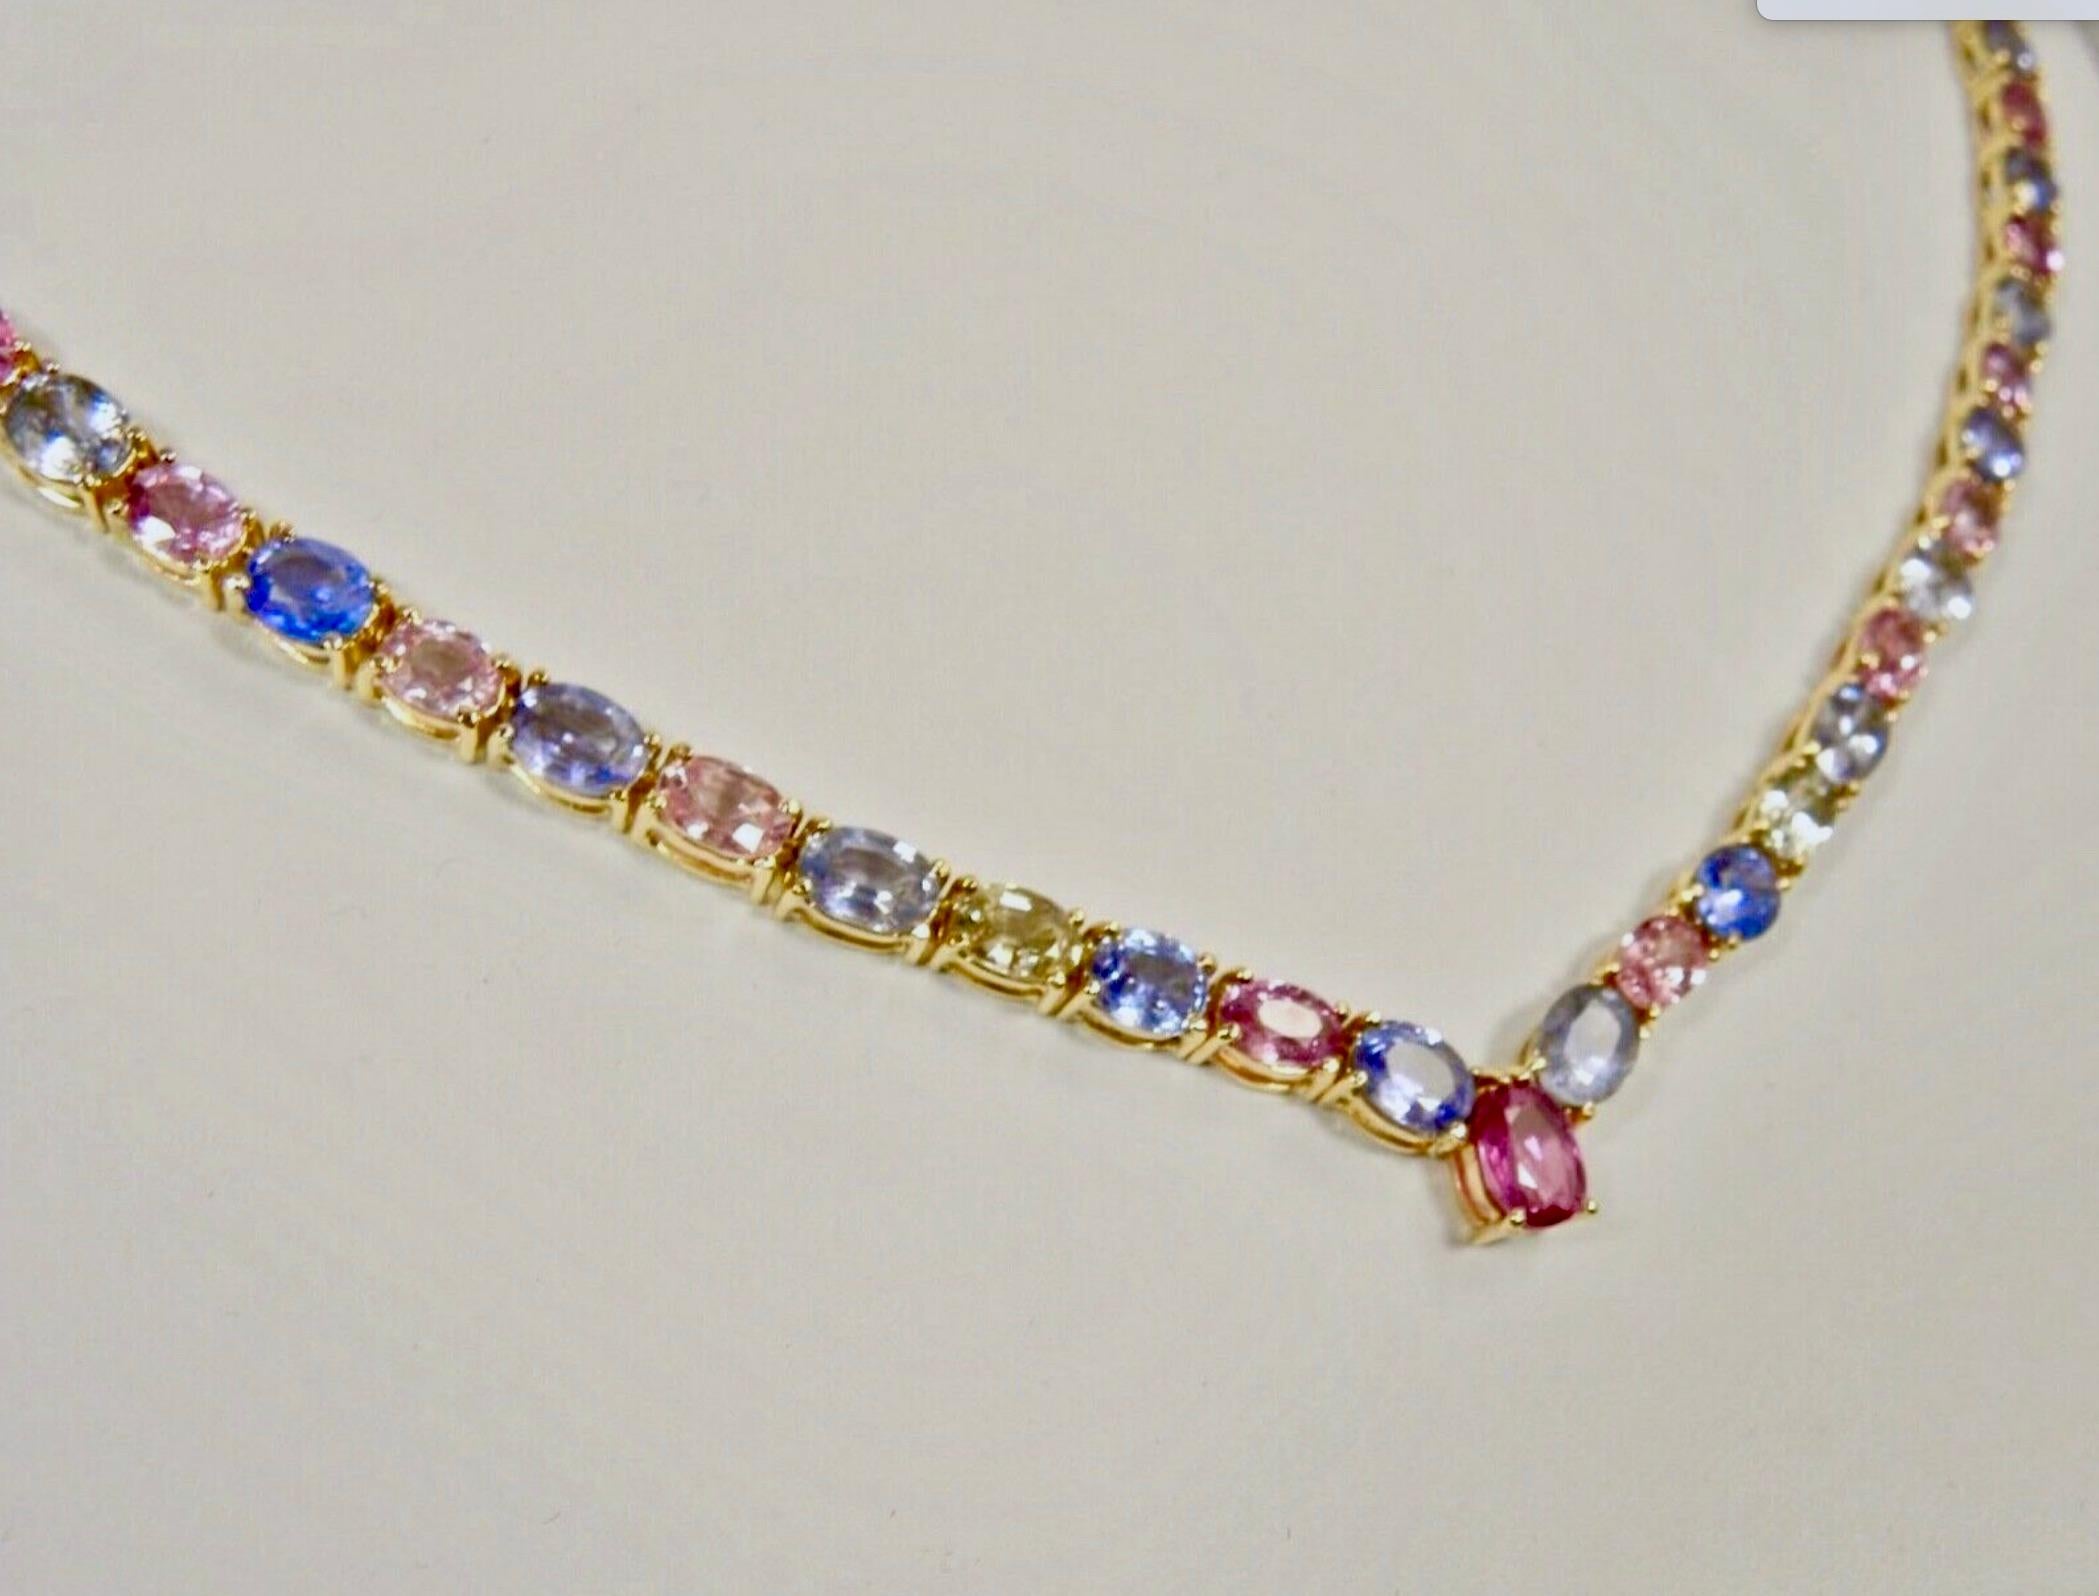  50.00 Carat Burma Unheated Multicolor Sapphires Necklace Yellow Gold 18K  For Sale 2